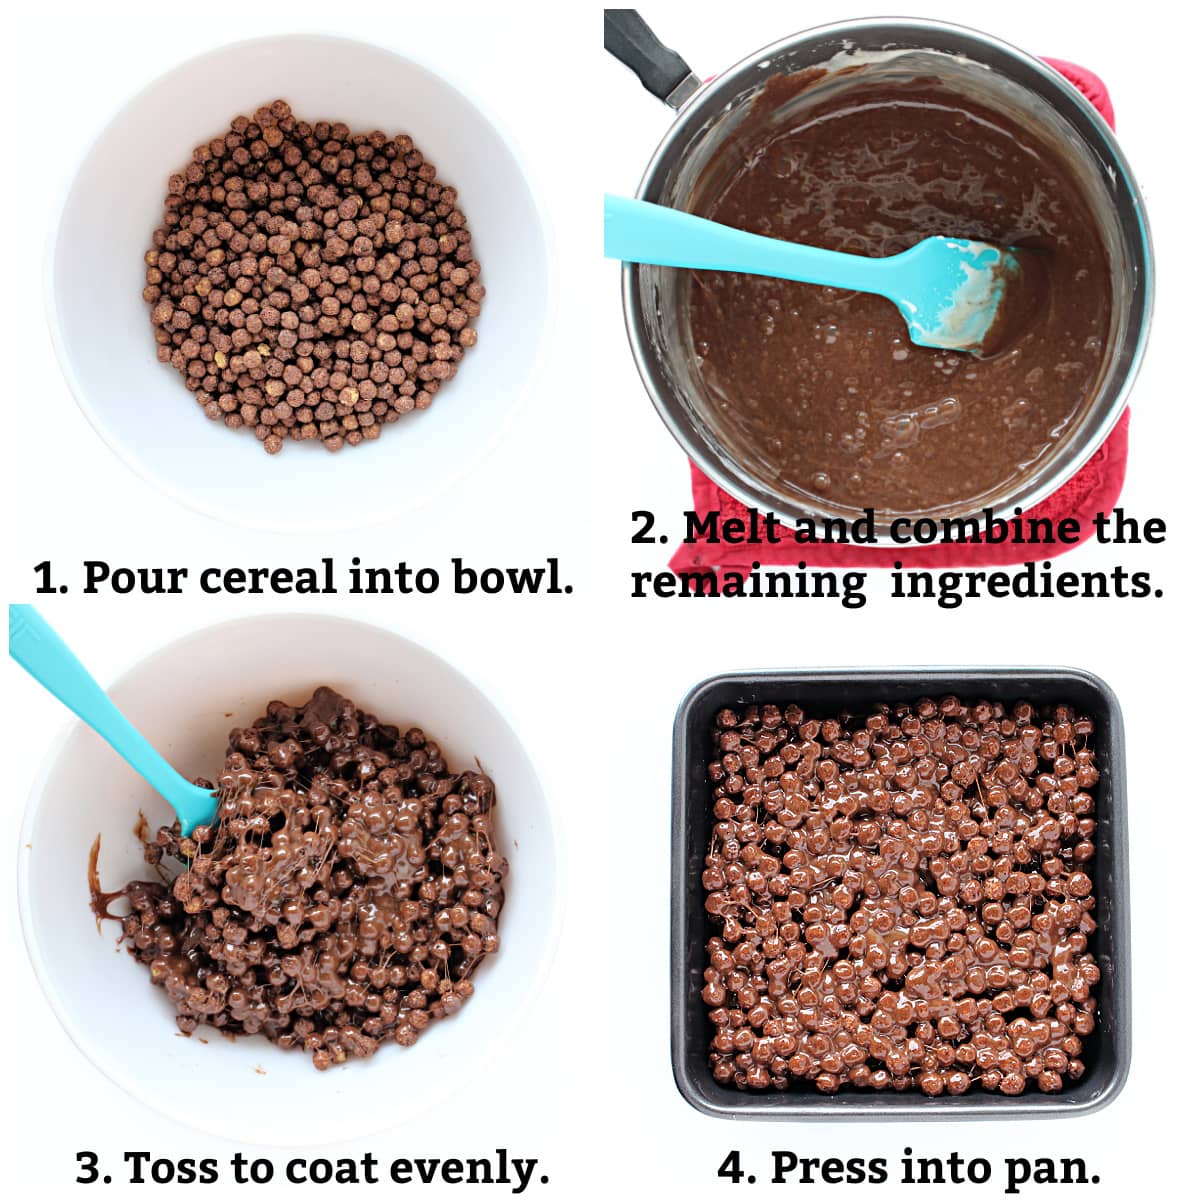 Instructions: pour cereal into bowl, melt remaining ingredients, mix with cereal. press into pan.